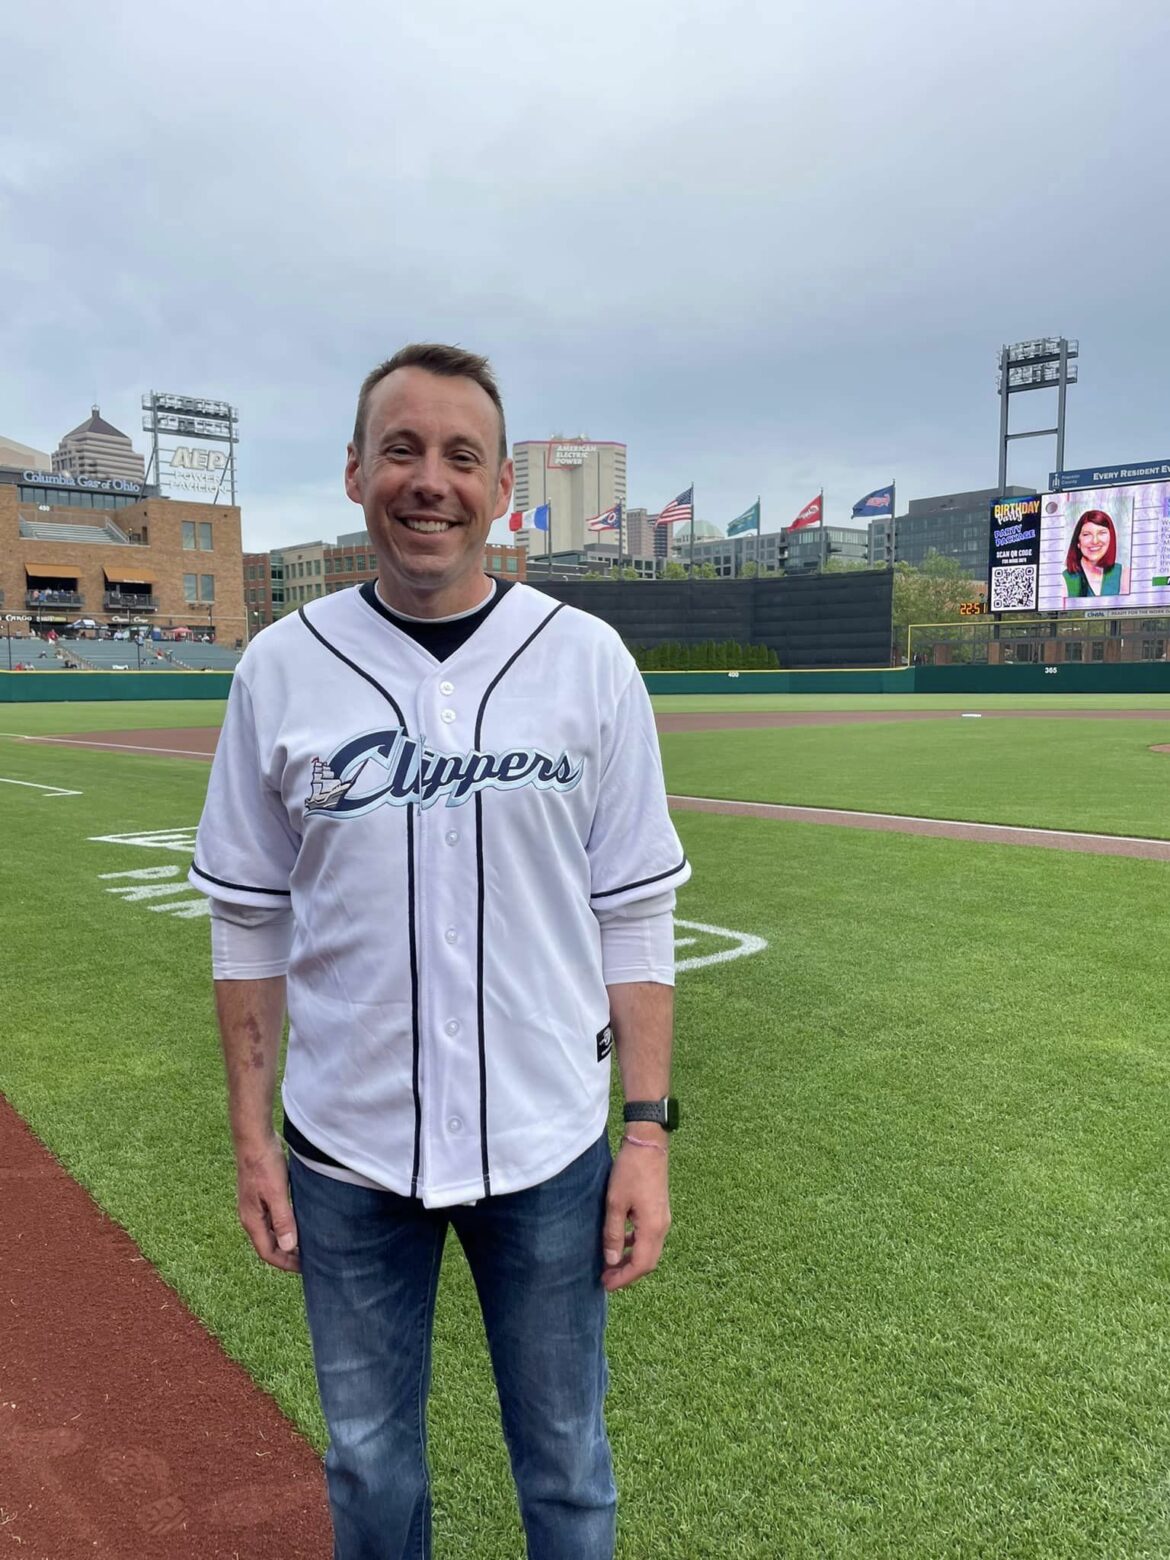 Photo of Detective Long standing on the ballfield with a Clippers jersey